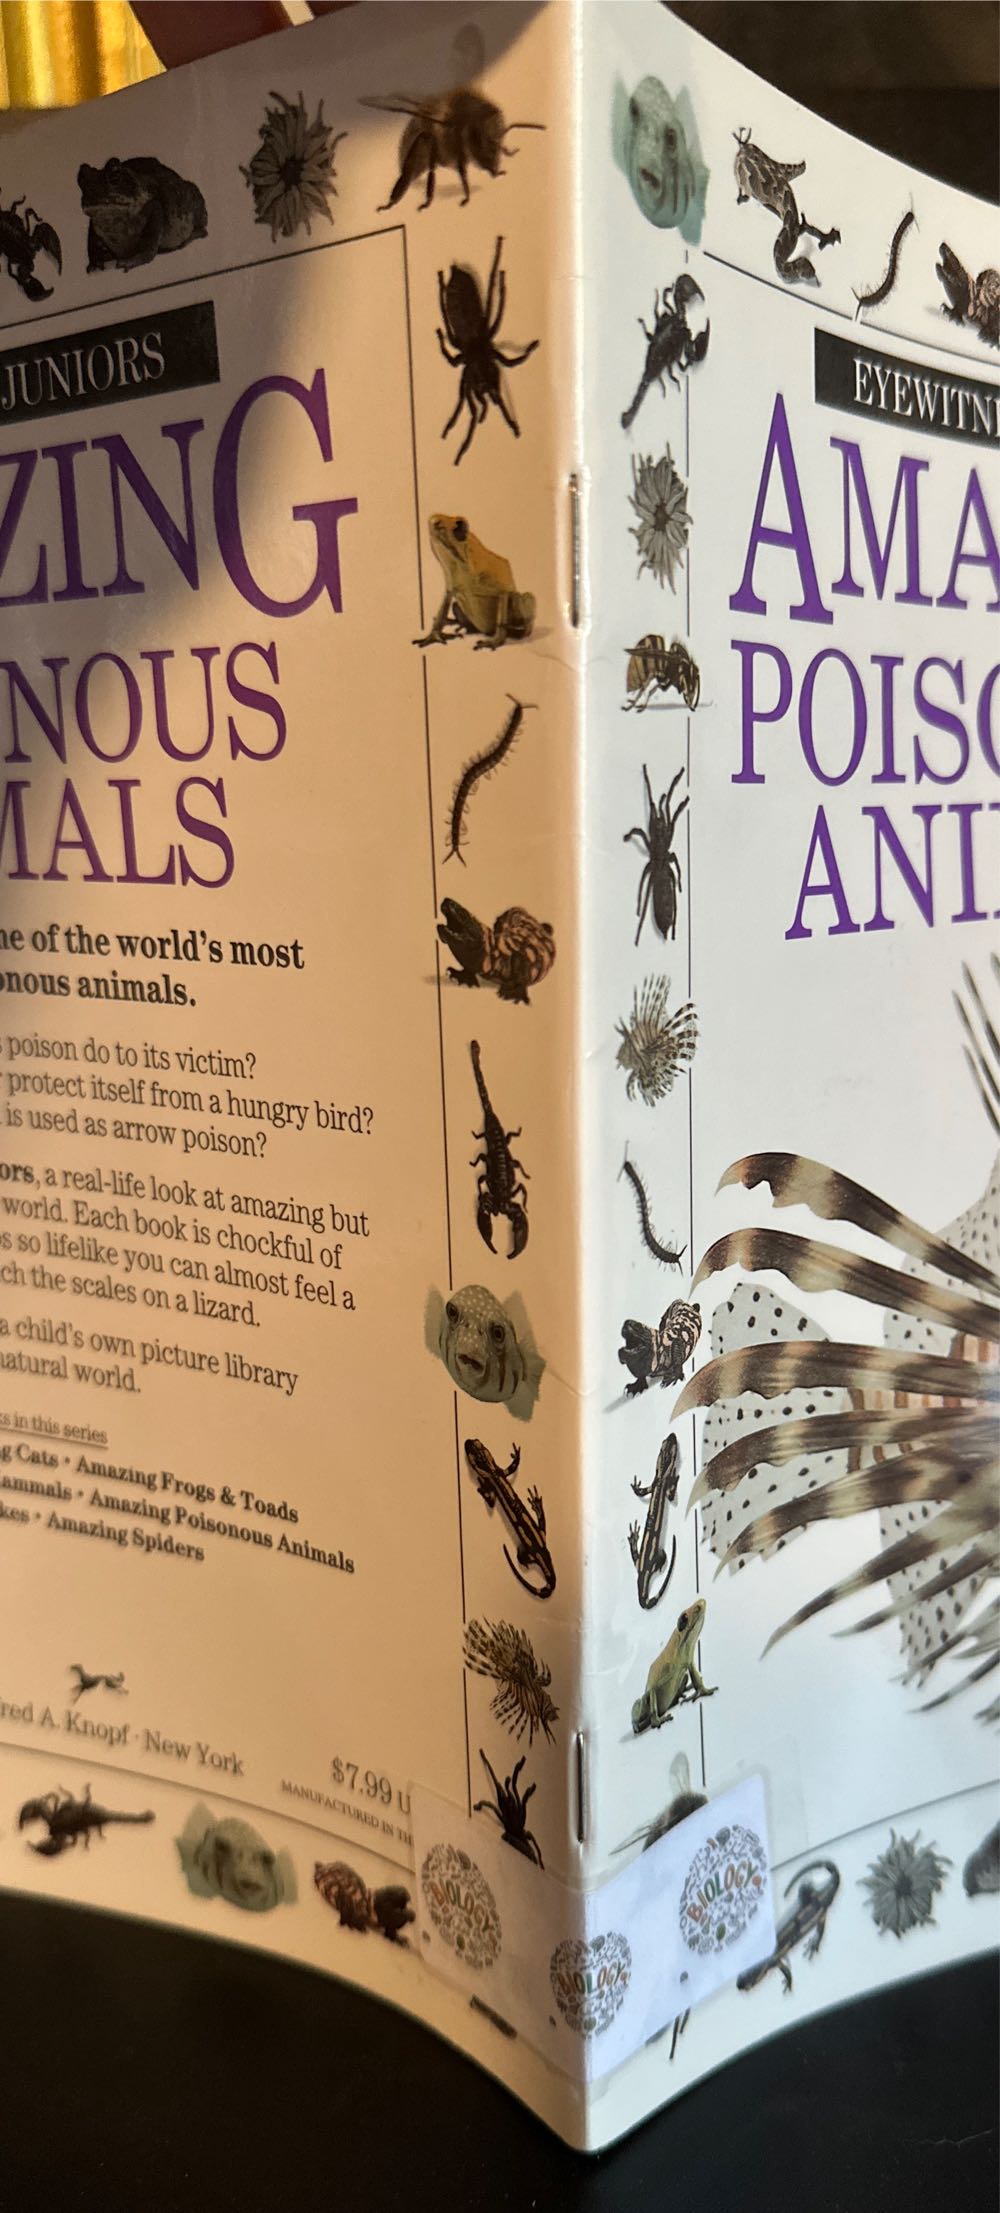 Amazing Poisonous Animals - Alexandra Parsons (Knopf Books for Young Readers) book collectible [Barcode 9780679806998] - Main Image 2